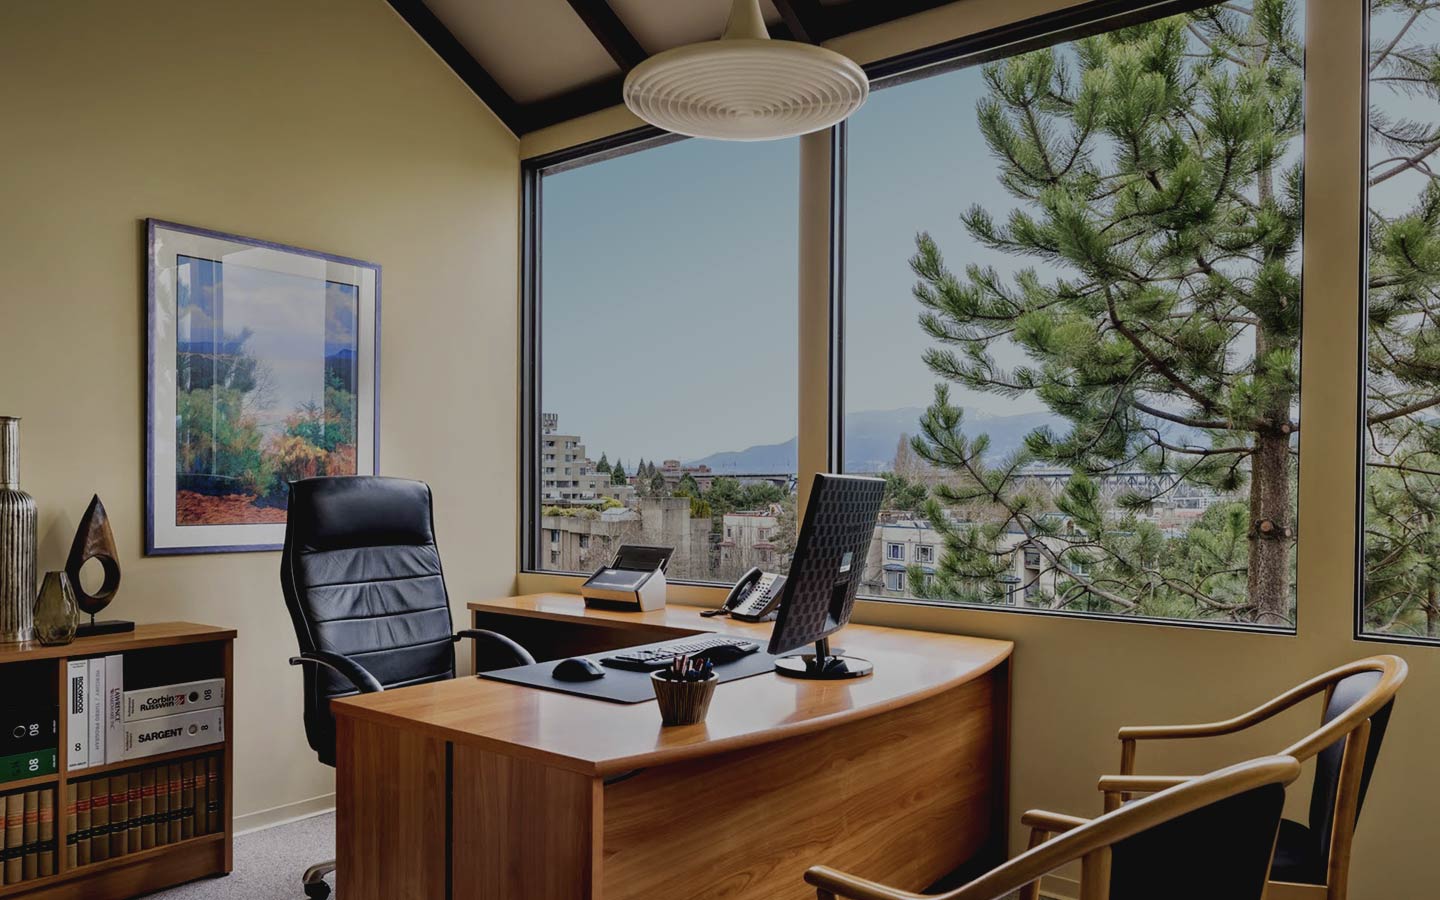 Office space Vancouver - New Look Business Centre offers professional executive offices for rent Vancouver BC, 100-1000 sqft, flexible lease, furnished...